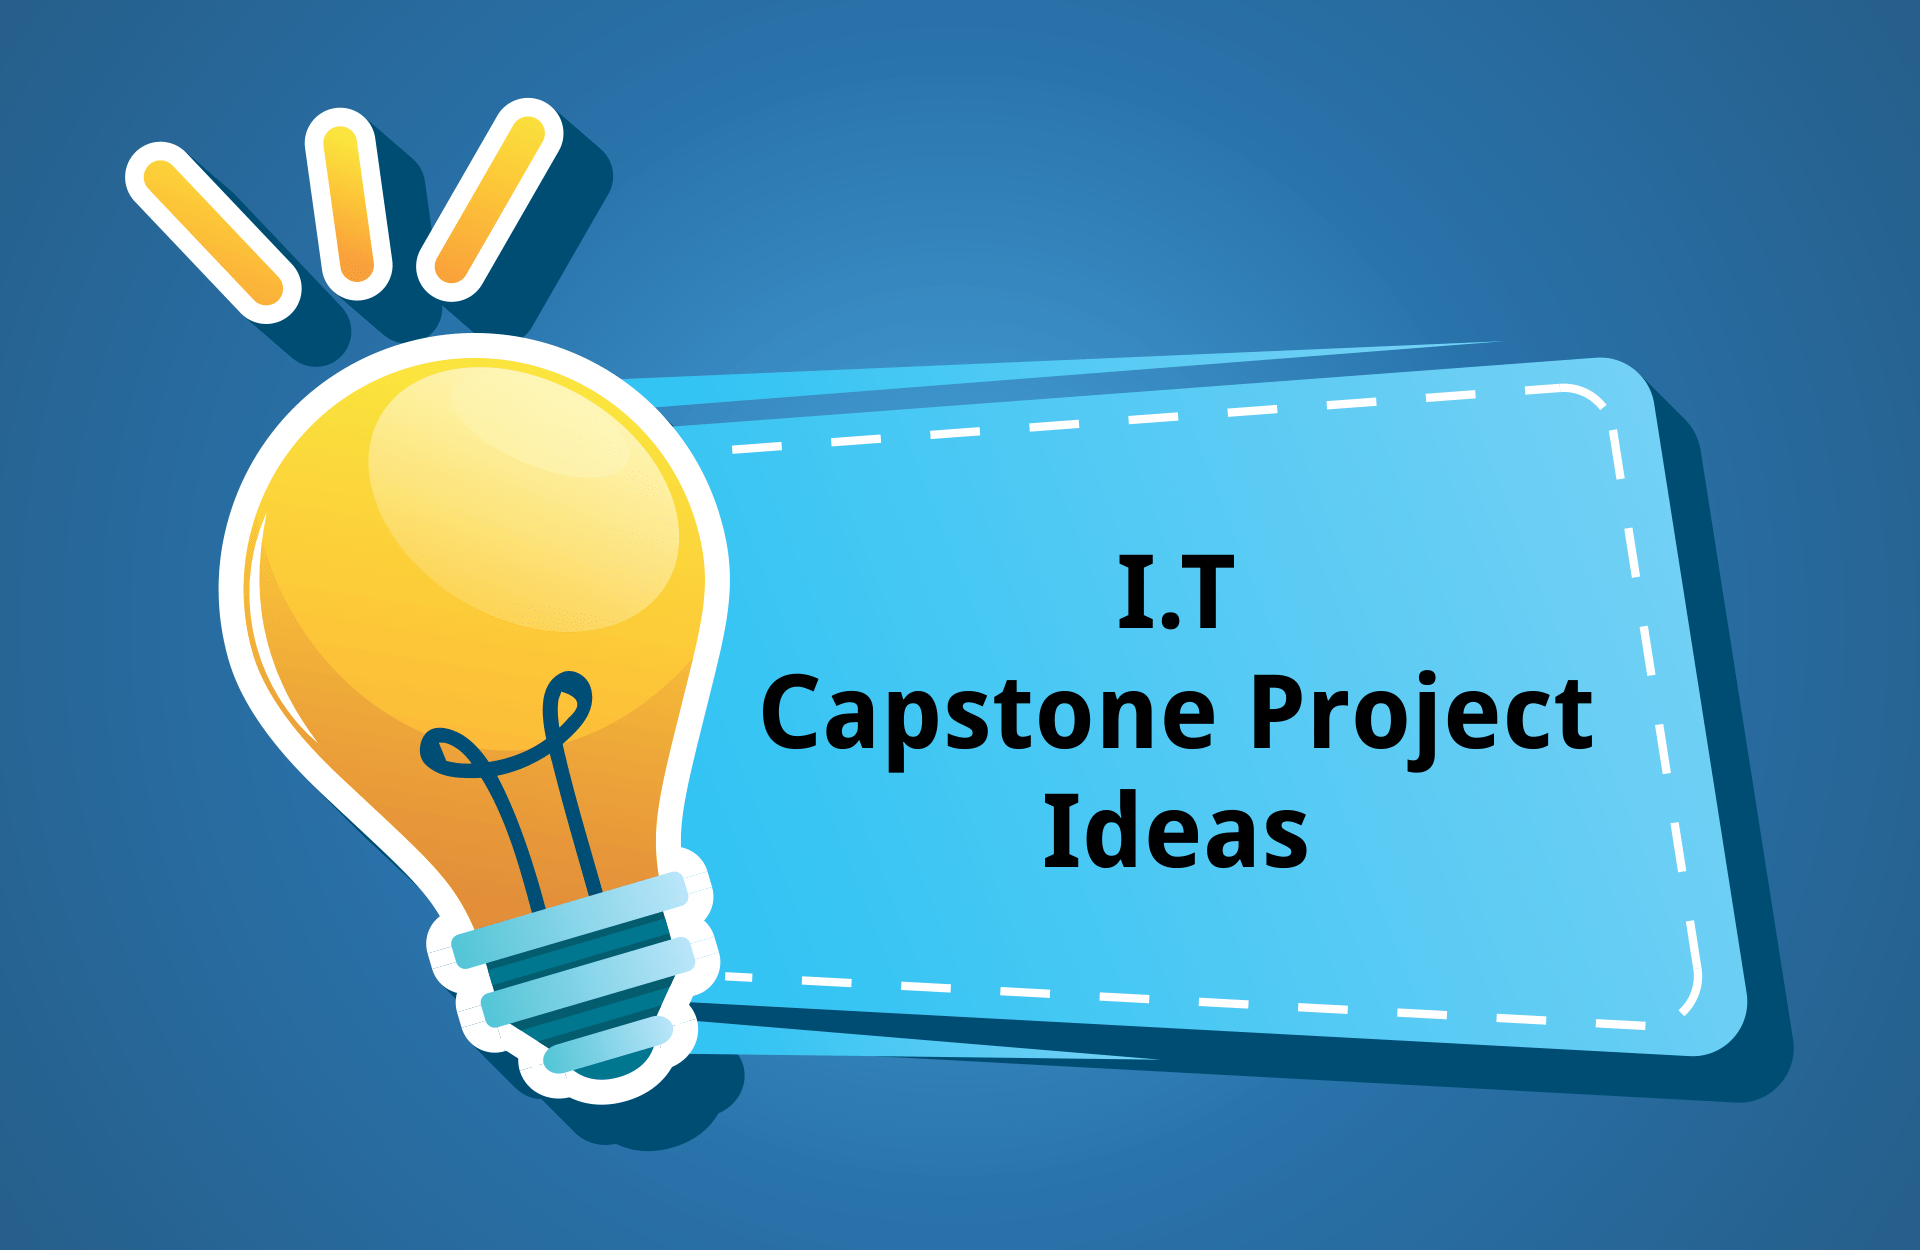 capstone project ideas for it students related to pandemic